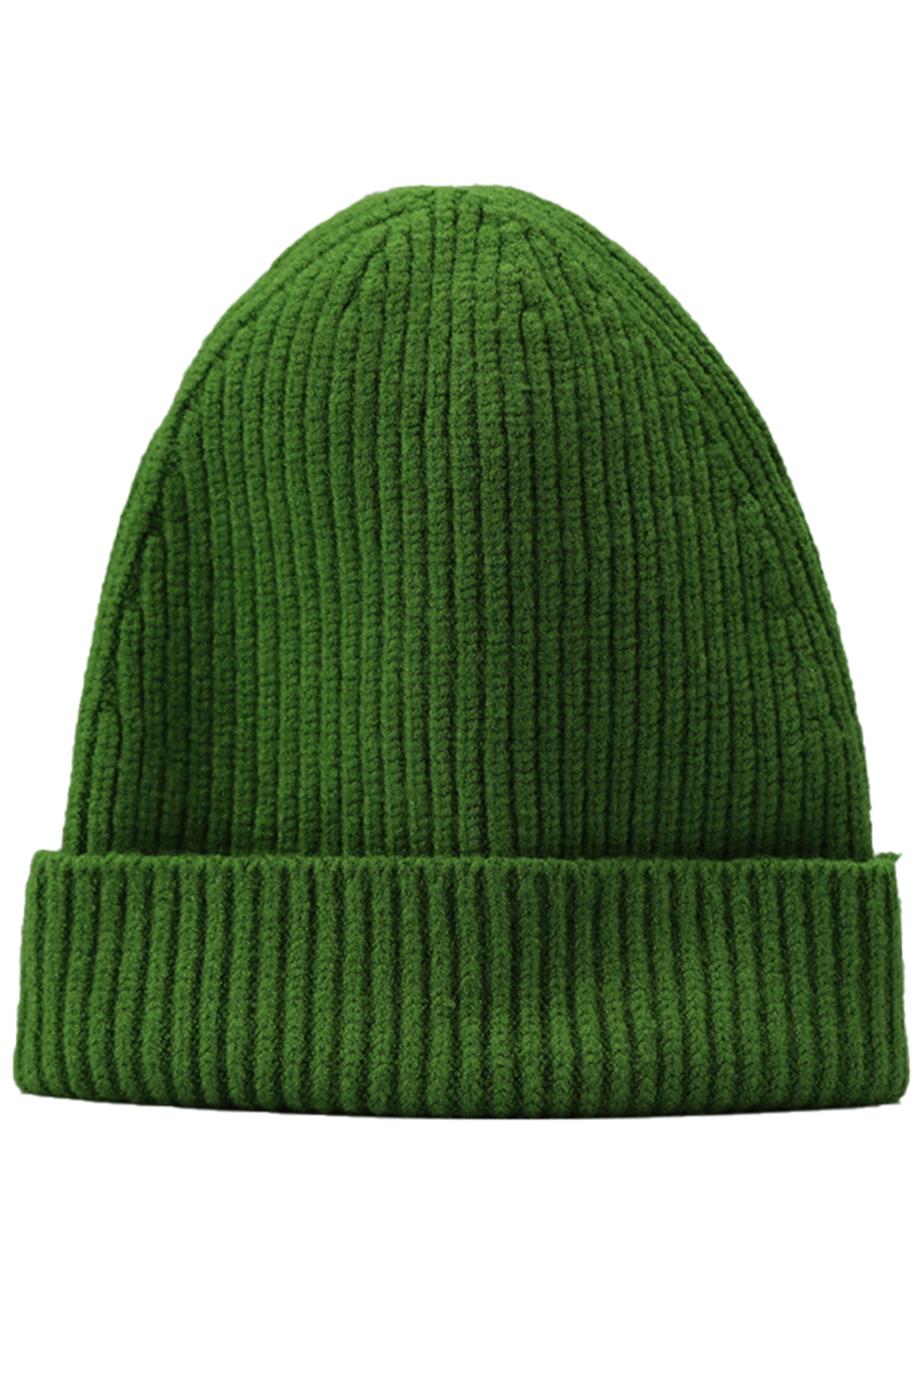 APPARIS RIBBED KNIT BEANIE ONE SIZE